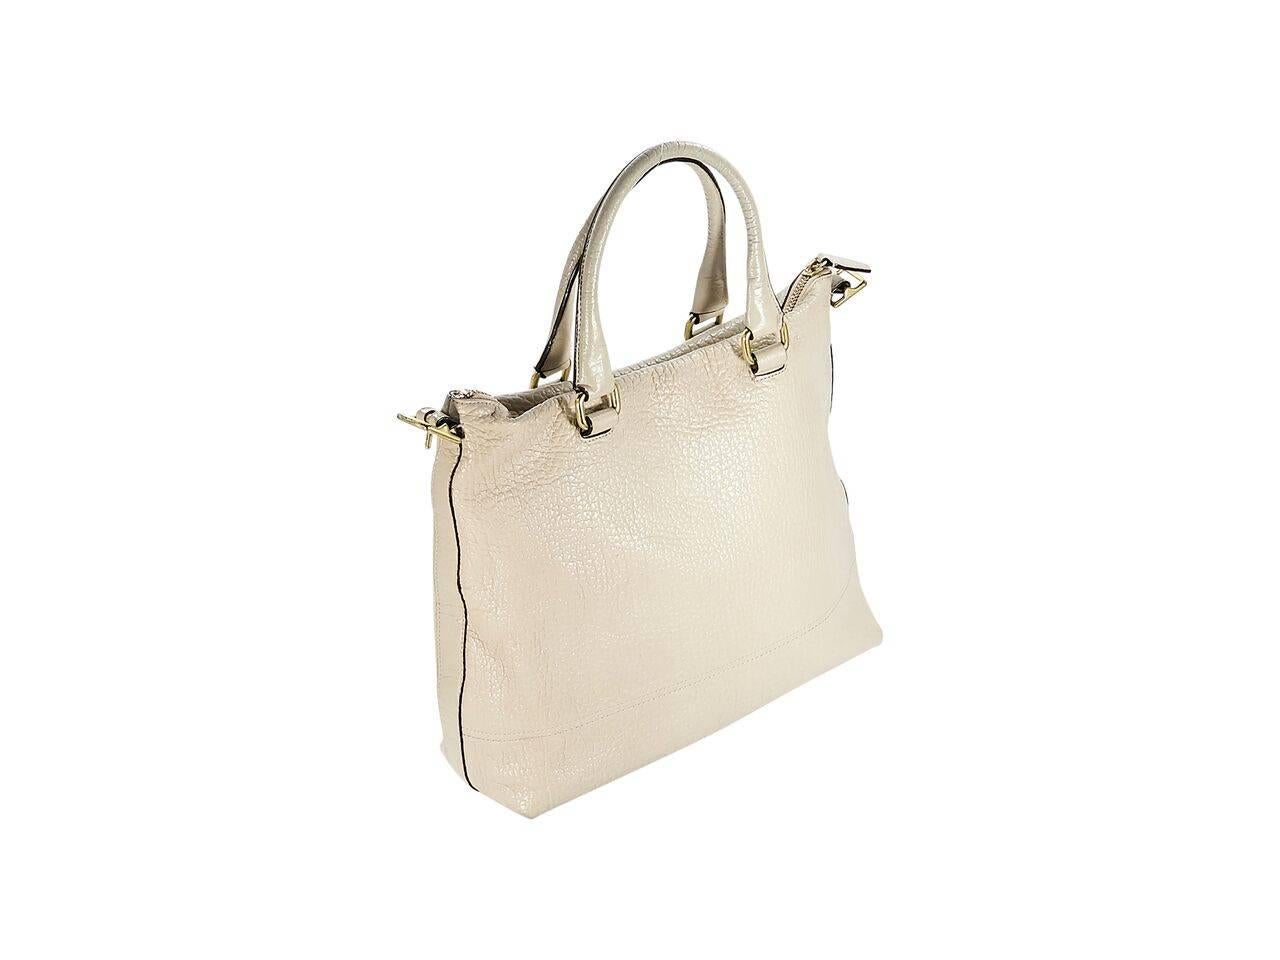 Product details:  Taupe pebbled leather tote bag by Coach.  Dual carry handles.  Top zip closure.  Lined interior with inner zip and slide pockets.  Front exterior zip pocket.  Goldtone hardware.  16.75